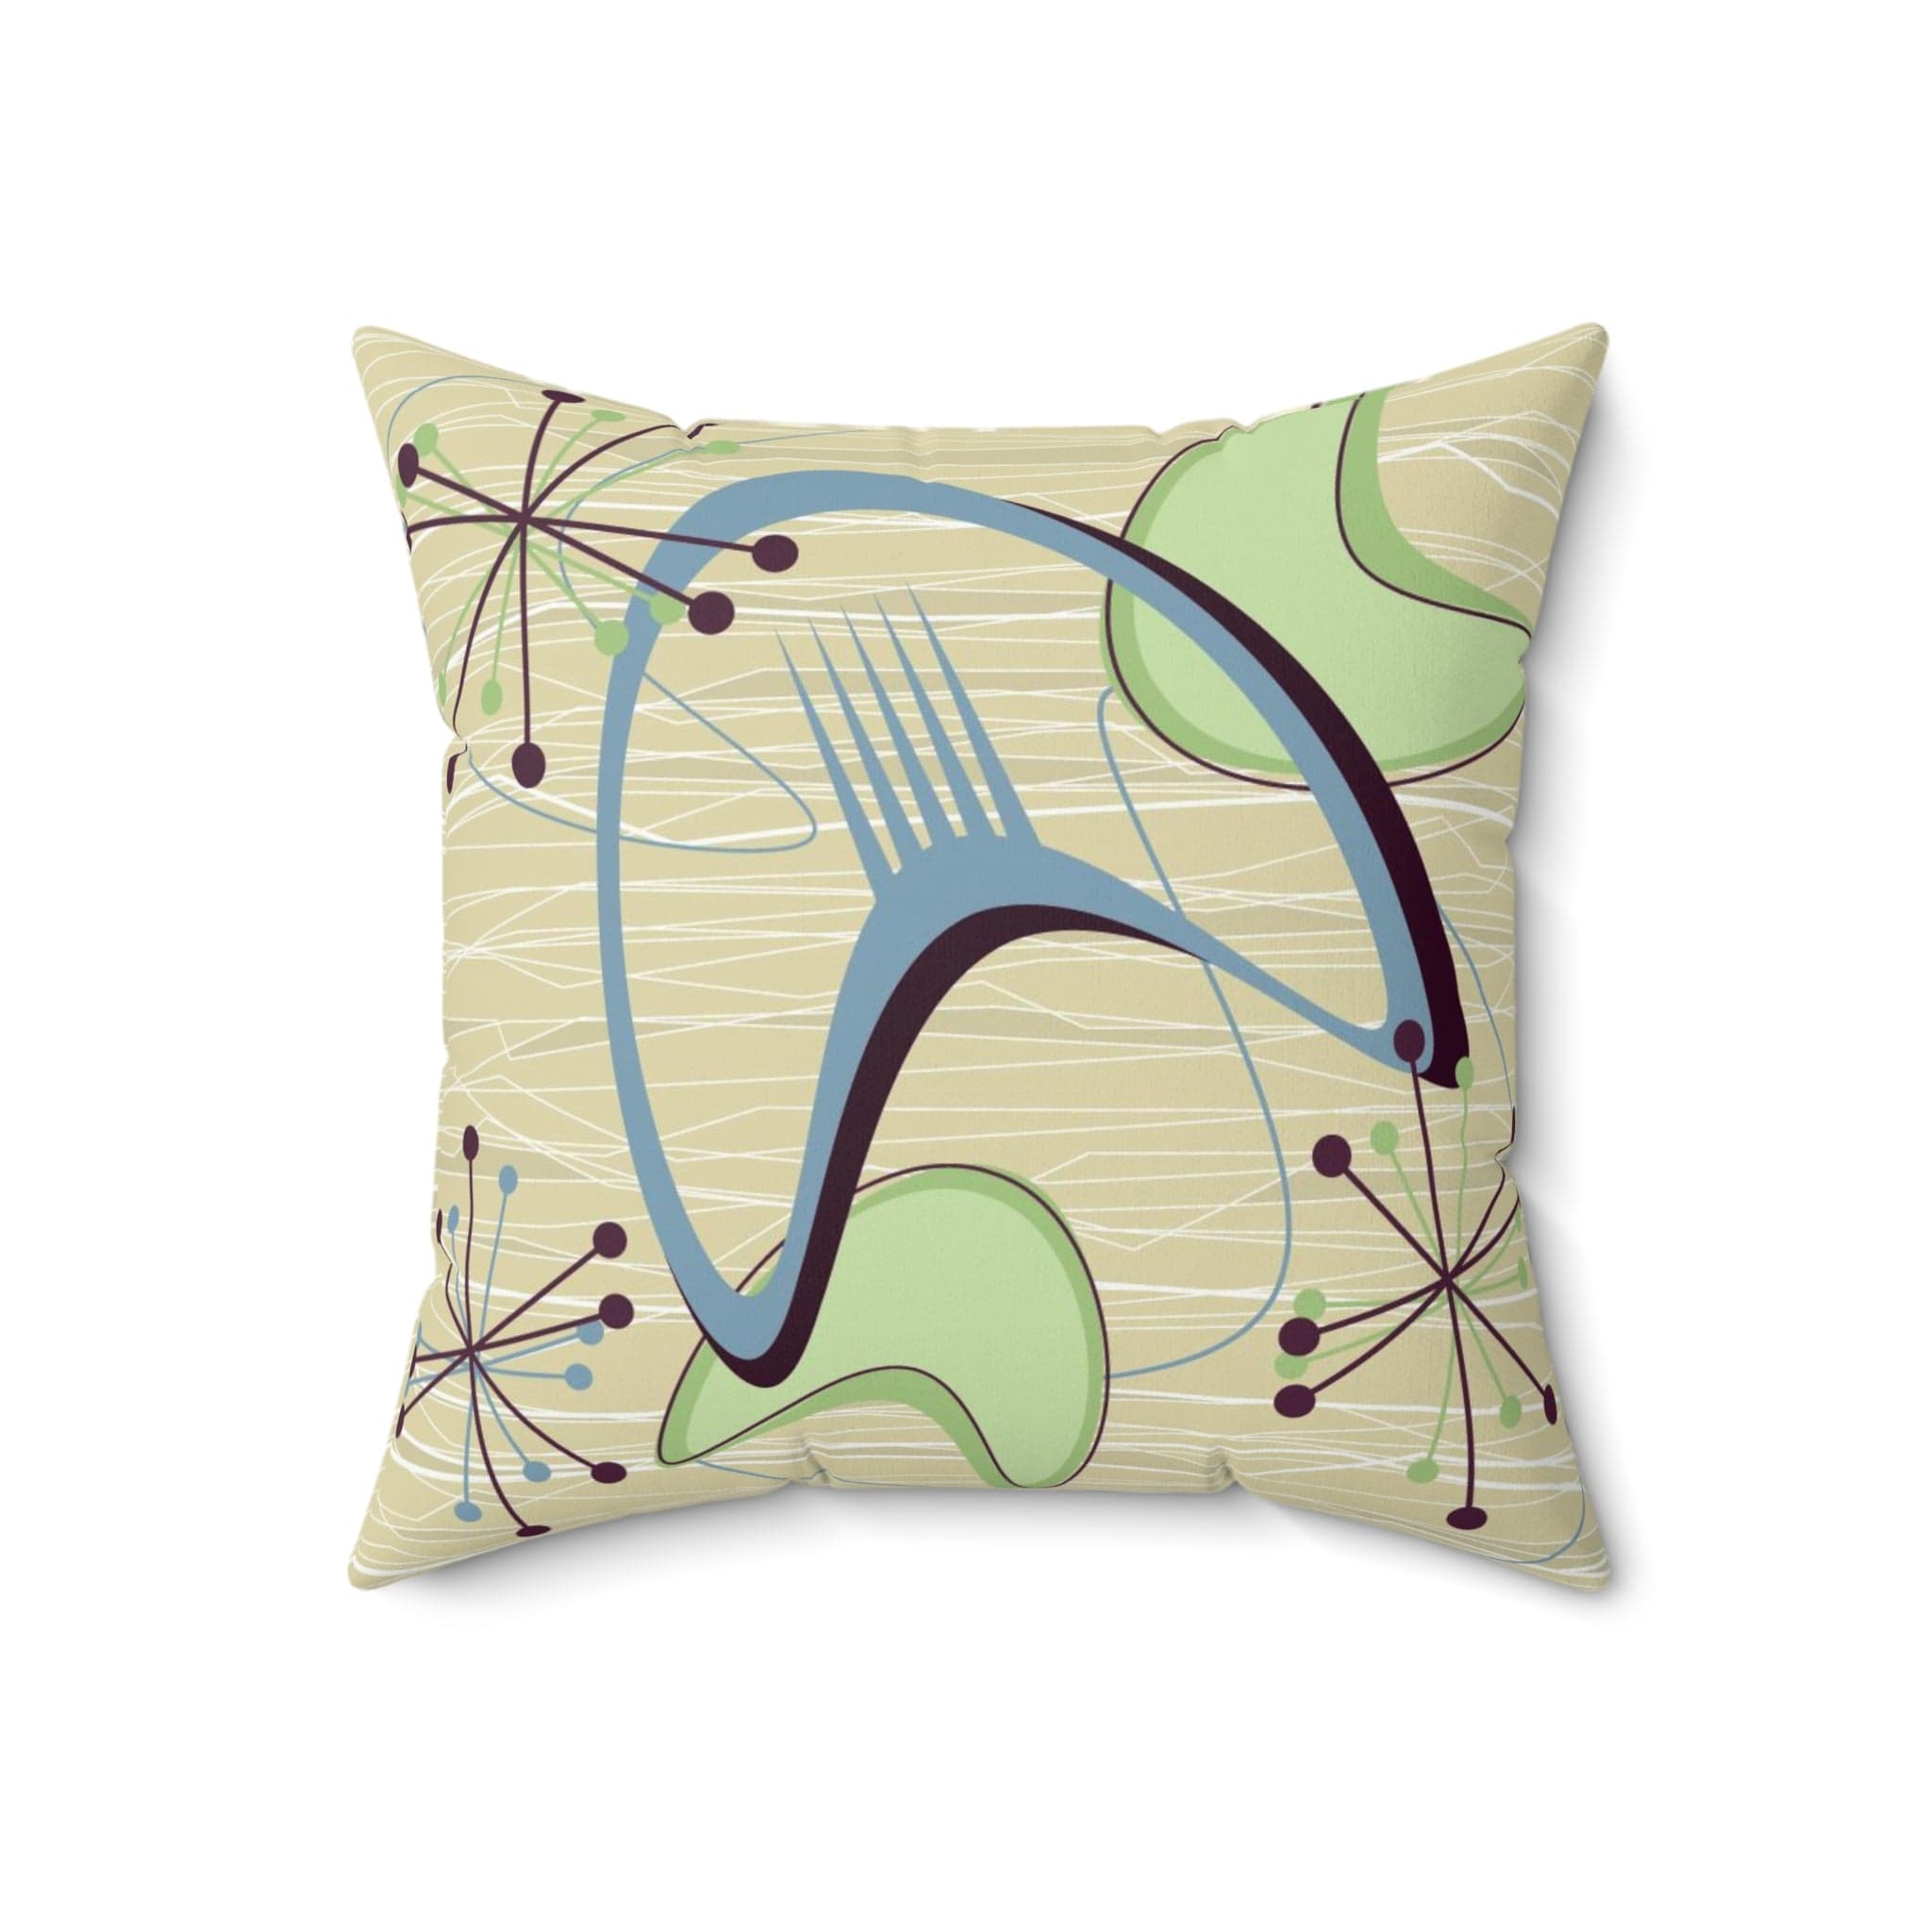 Printify 1950s Atomic Boomerang Mid Century Modern Throw Pillow in Retro Vintage Beige, Blue, Green Geometric Starbursts, MCM Abstract Accent Pillow Home Decor 18&quot; × 18&quot; 18545395407889238851